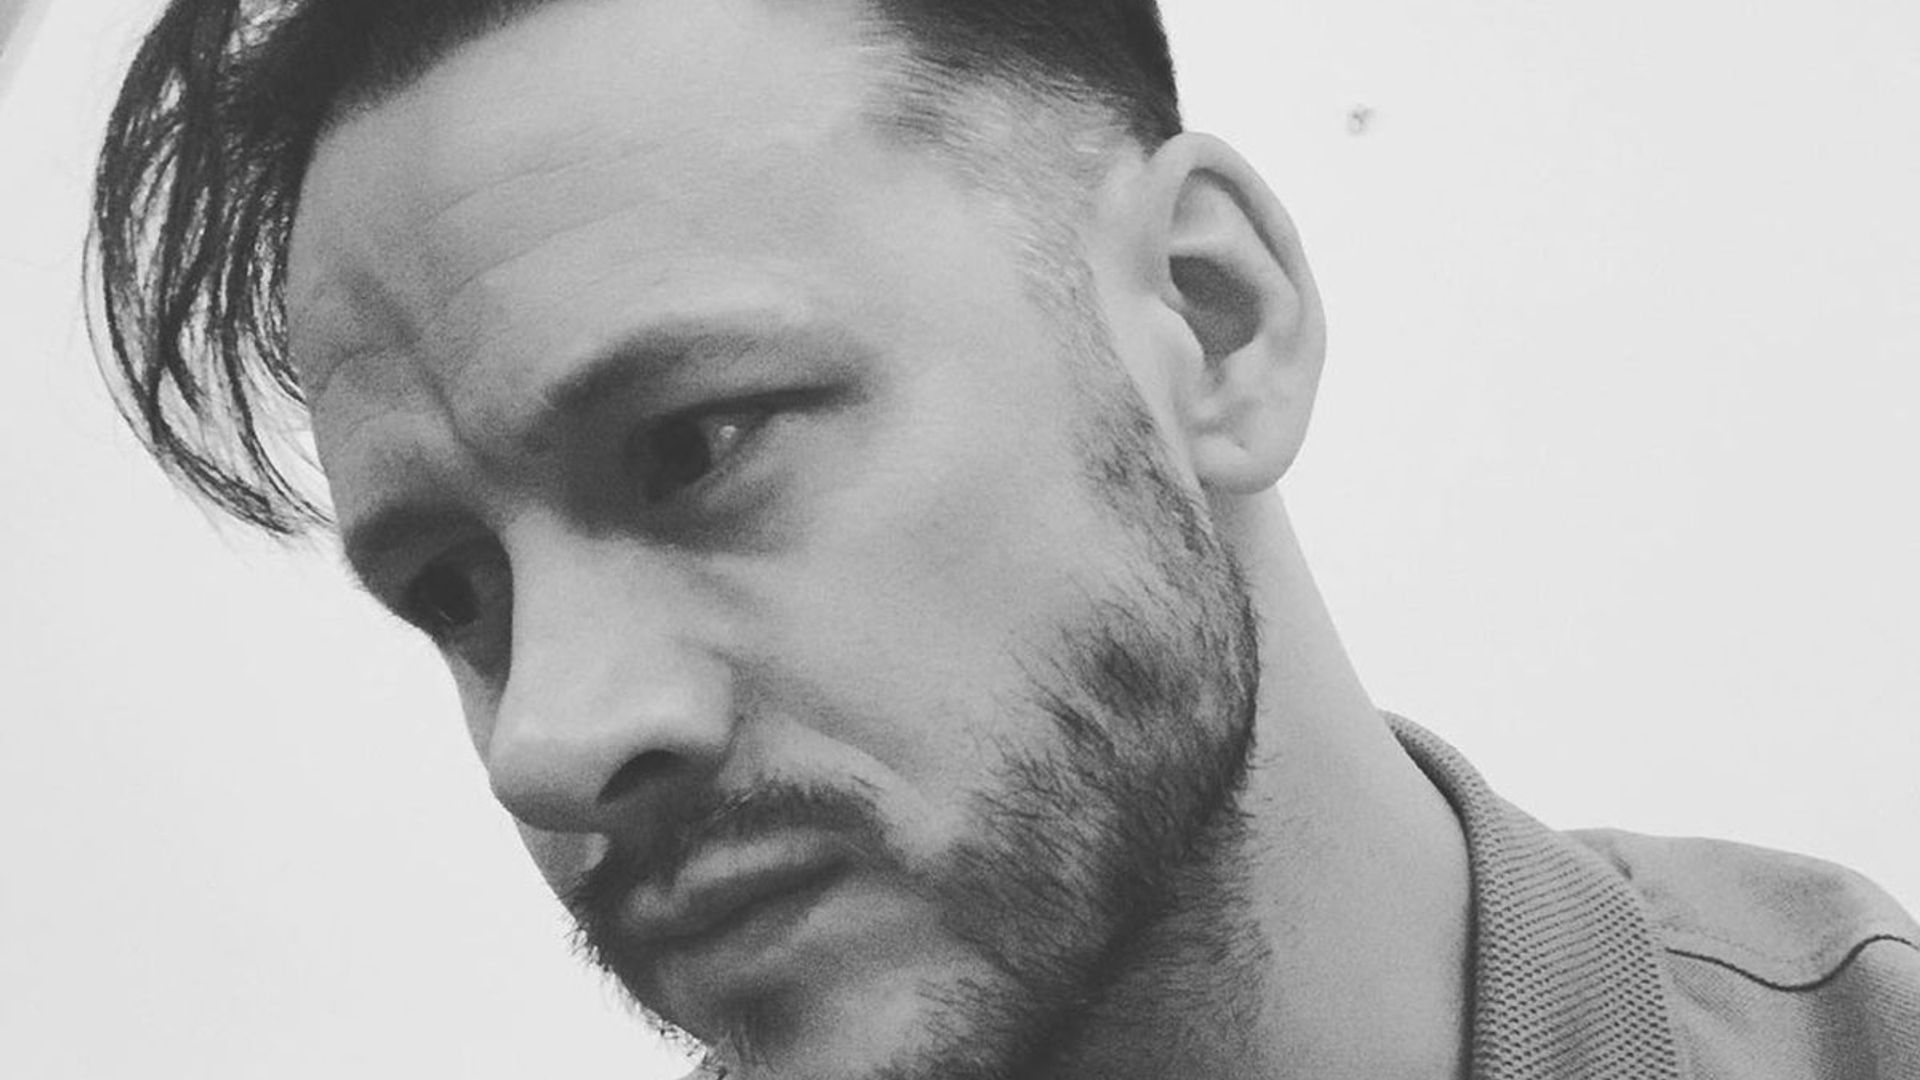 Kevin Clifton reacts to sad news in moving Instagram post